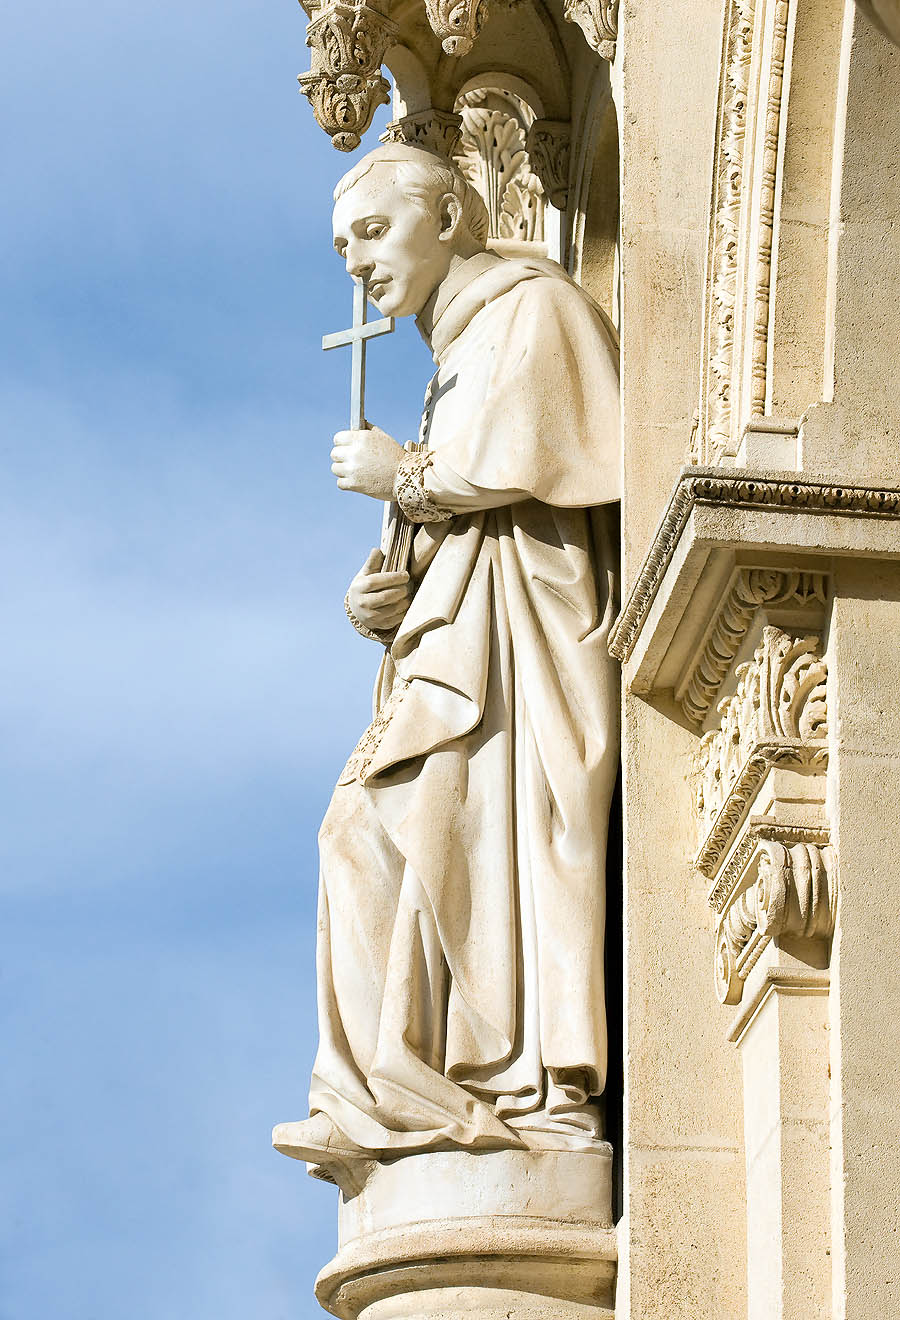 Monte Carlo: the statue of Saint Charles decorating the church entrance